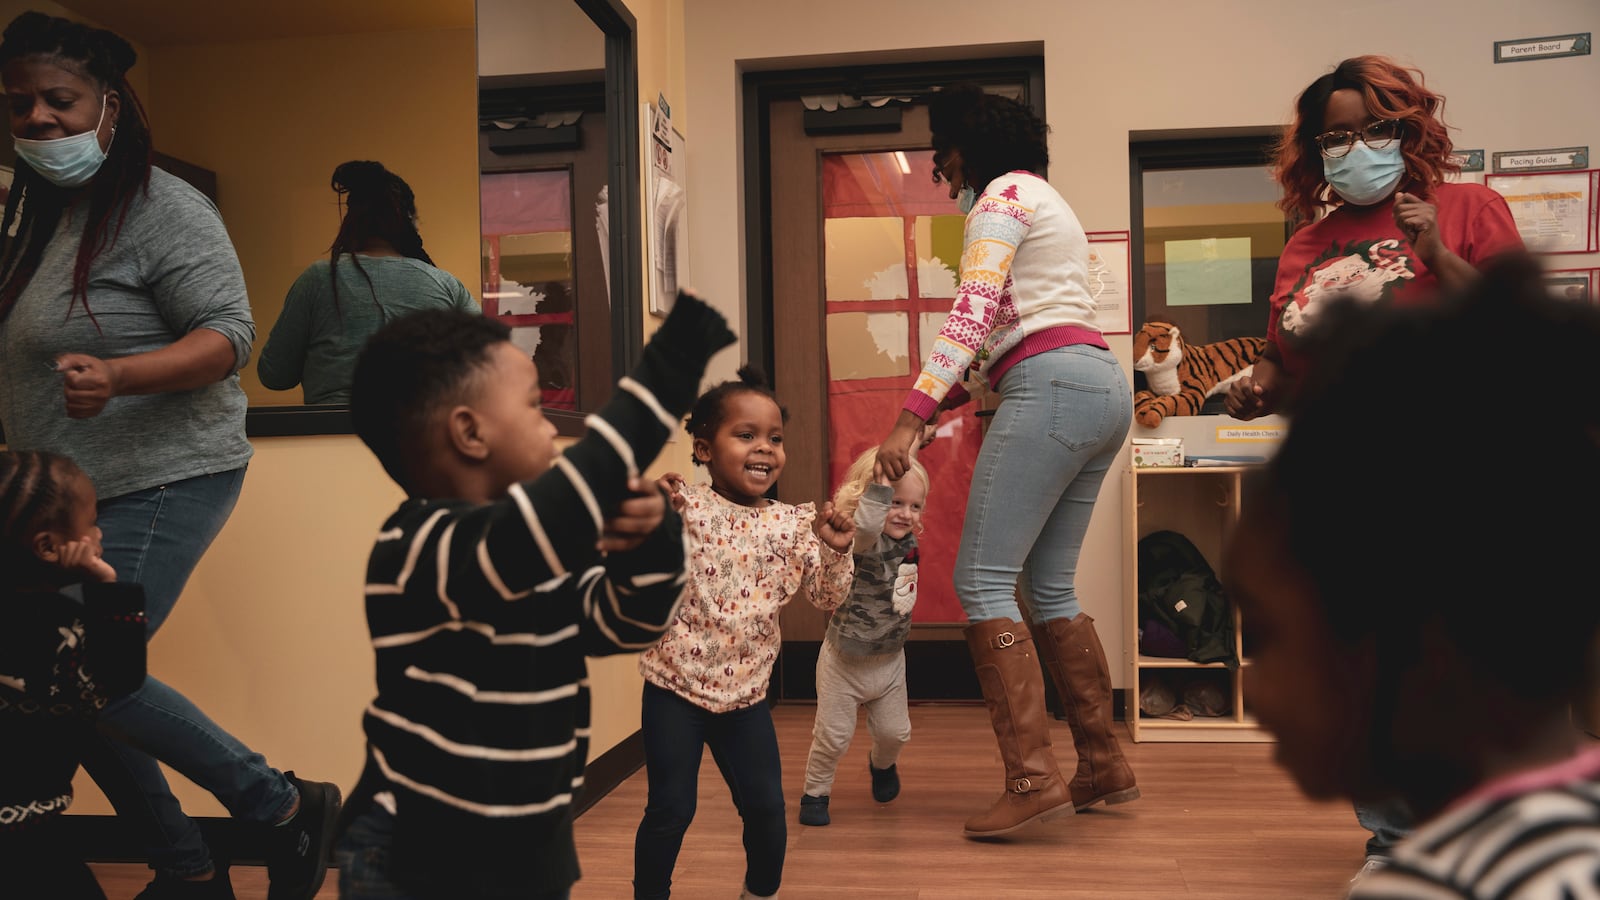 Teachers play and dance with their young students in a classroom.